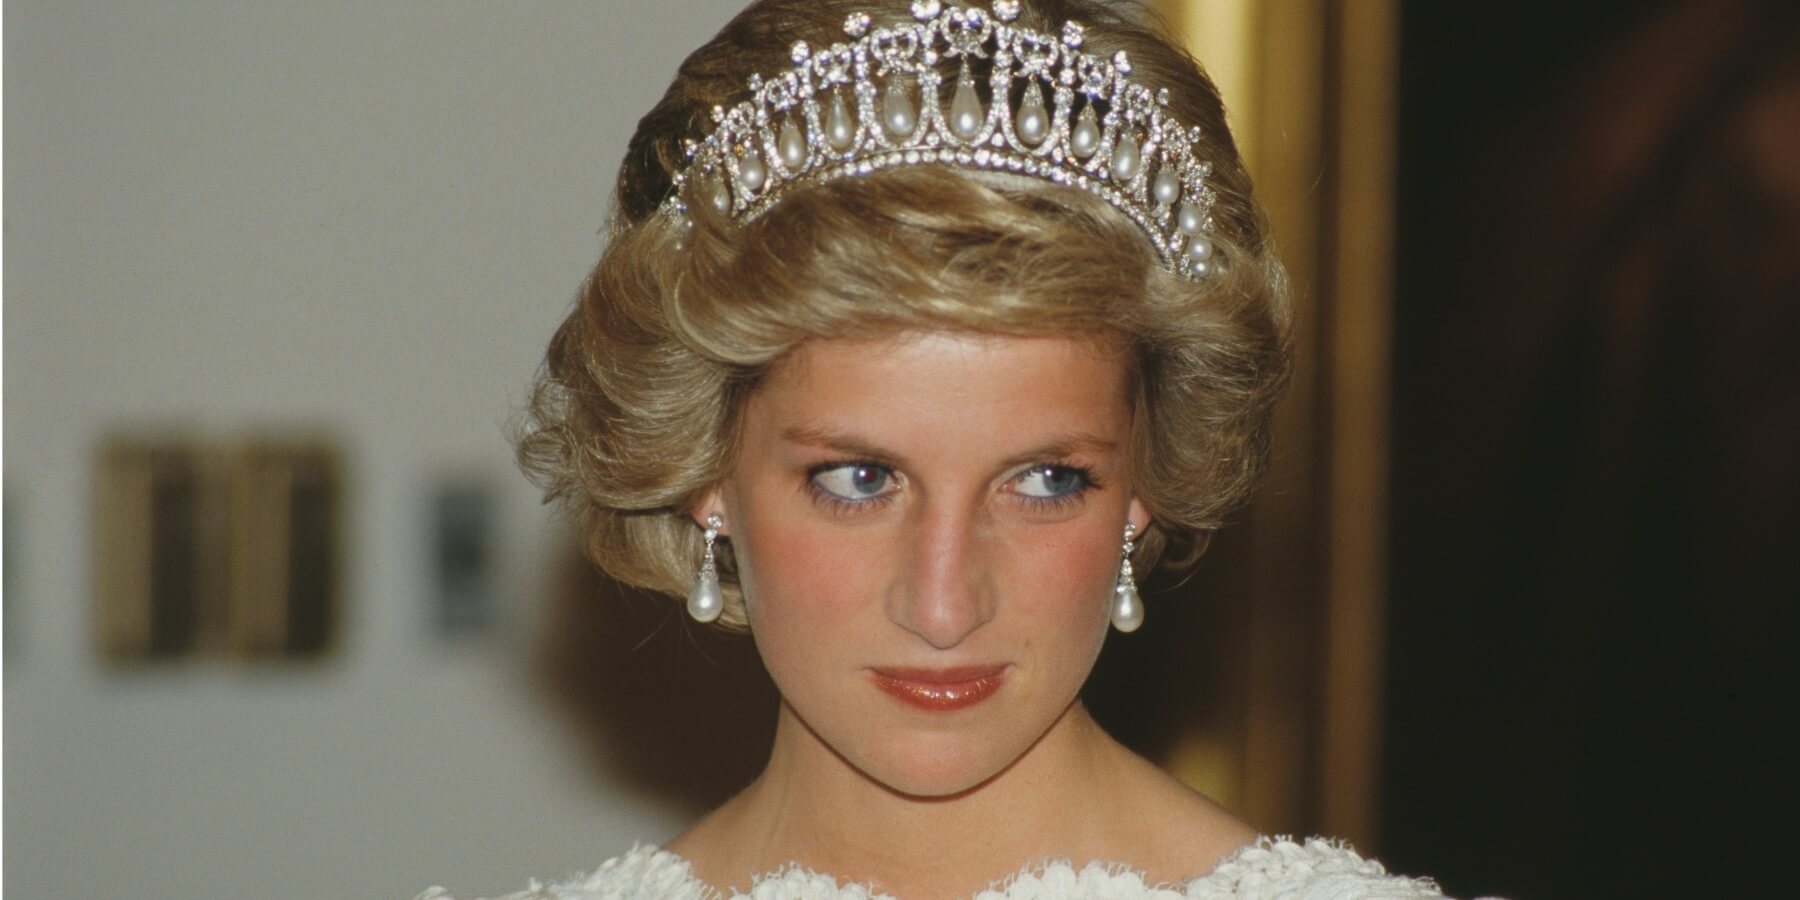 Princess Diana is photographed during a trip to Washington DC in 1985.